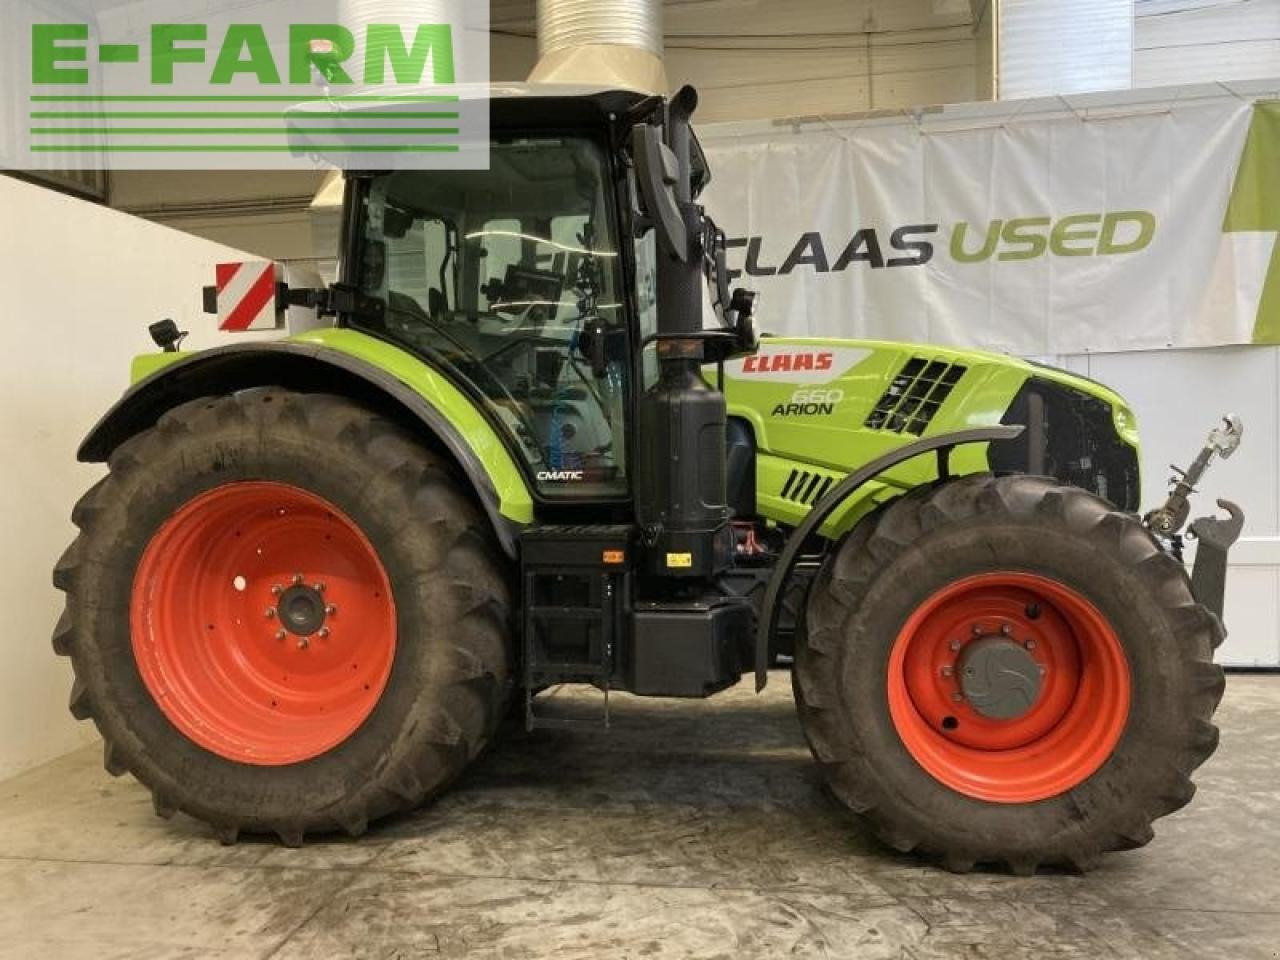 Farm tractor CLAAS arion 660 cmatic stage v